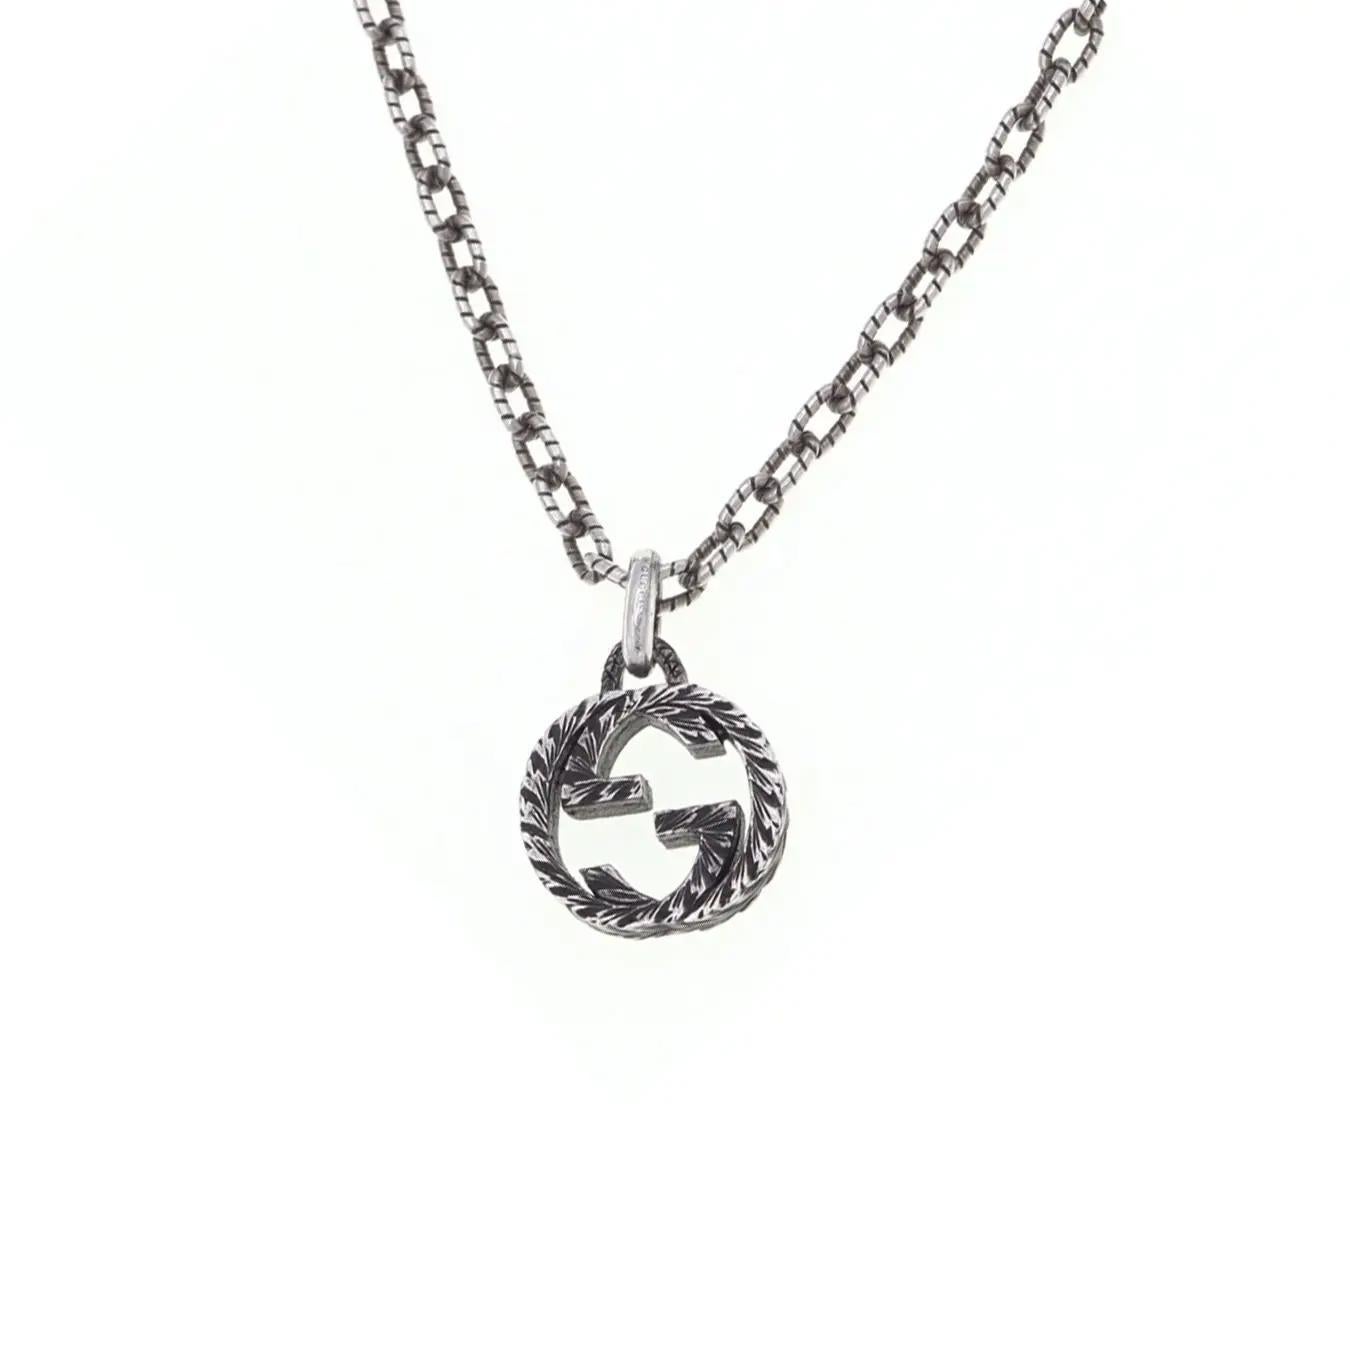 This GUCCI necklace features a textured chain with an interlocking G pendant in an engraved pattern. Designed in 925 sterling silver. Secured with lobster clasp. Chain length: 17.5 inches. Pendant size: 16.7mm x 15mm. Made in Italy. Unworn